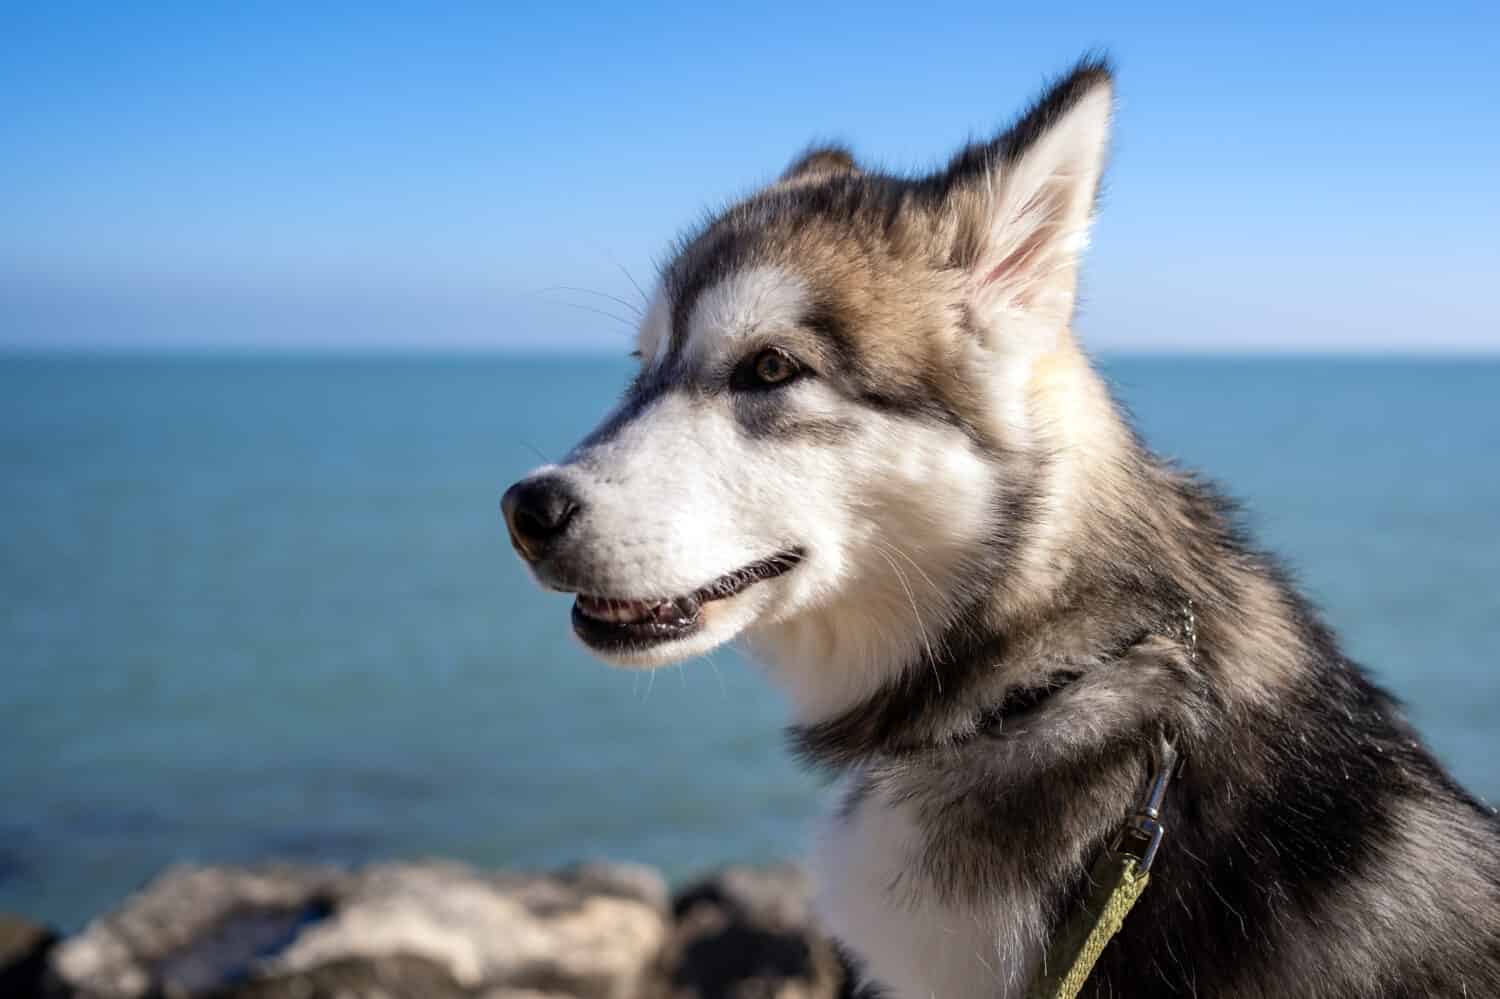 Young six months old Alaskan Malamute dog close up portrait at the sea.